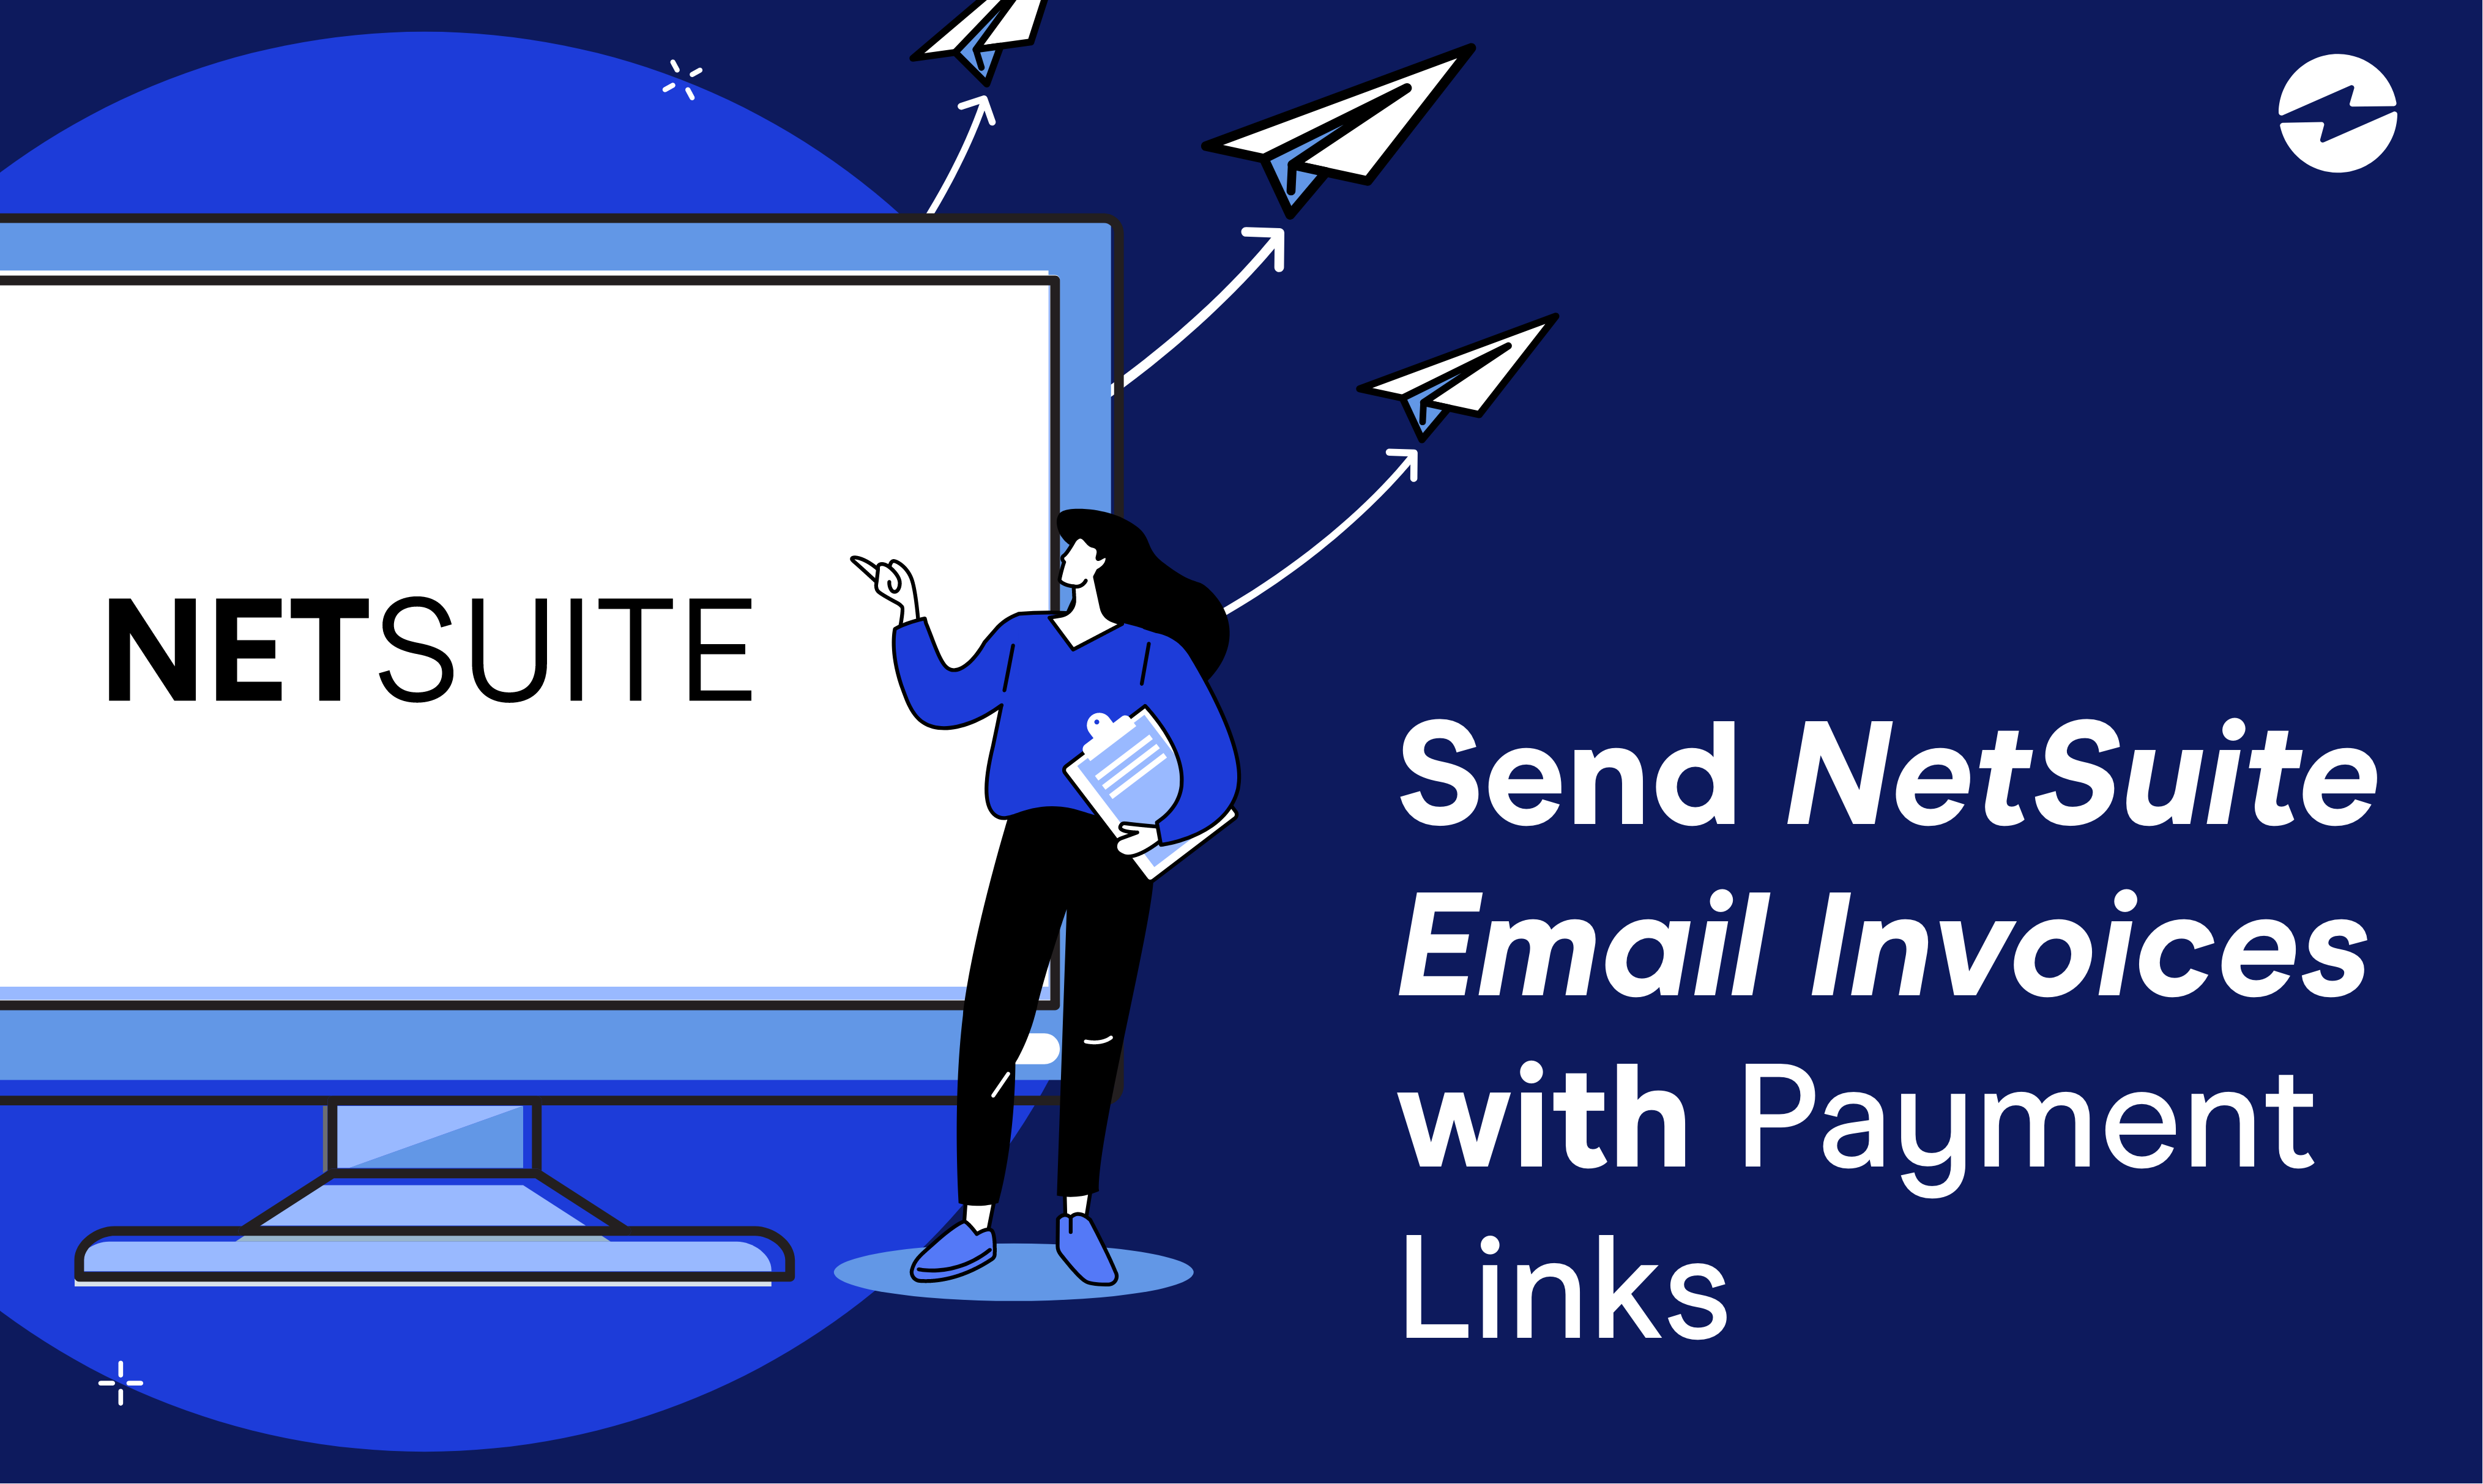 Send NetSuite Email Invoices